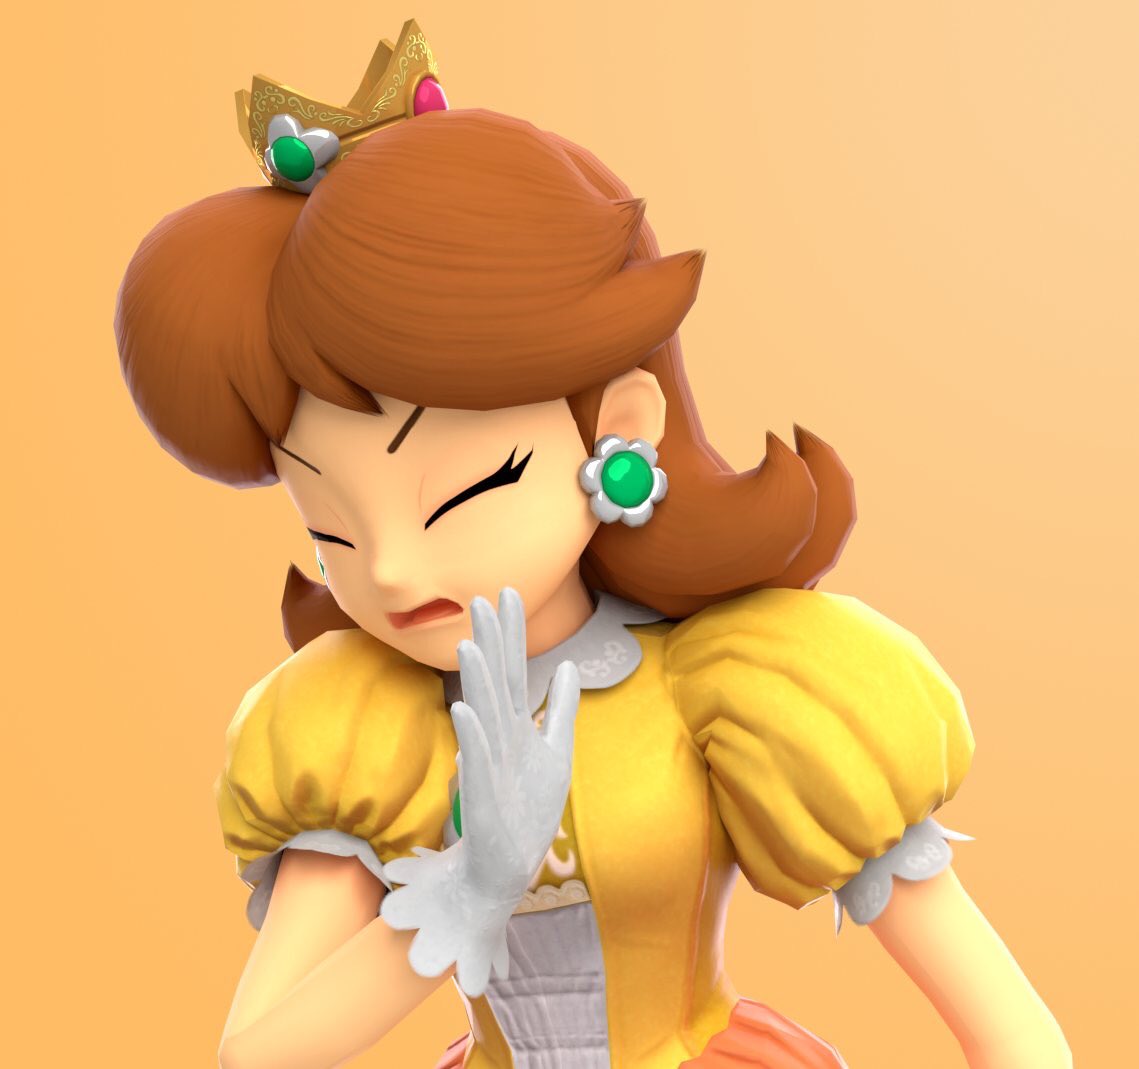 None Pizza With Left Boof on Twitter: "@oldmemoryman Princess Daisy sa...